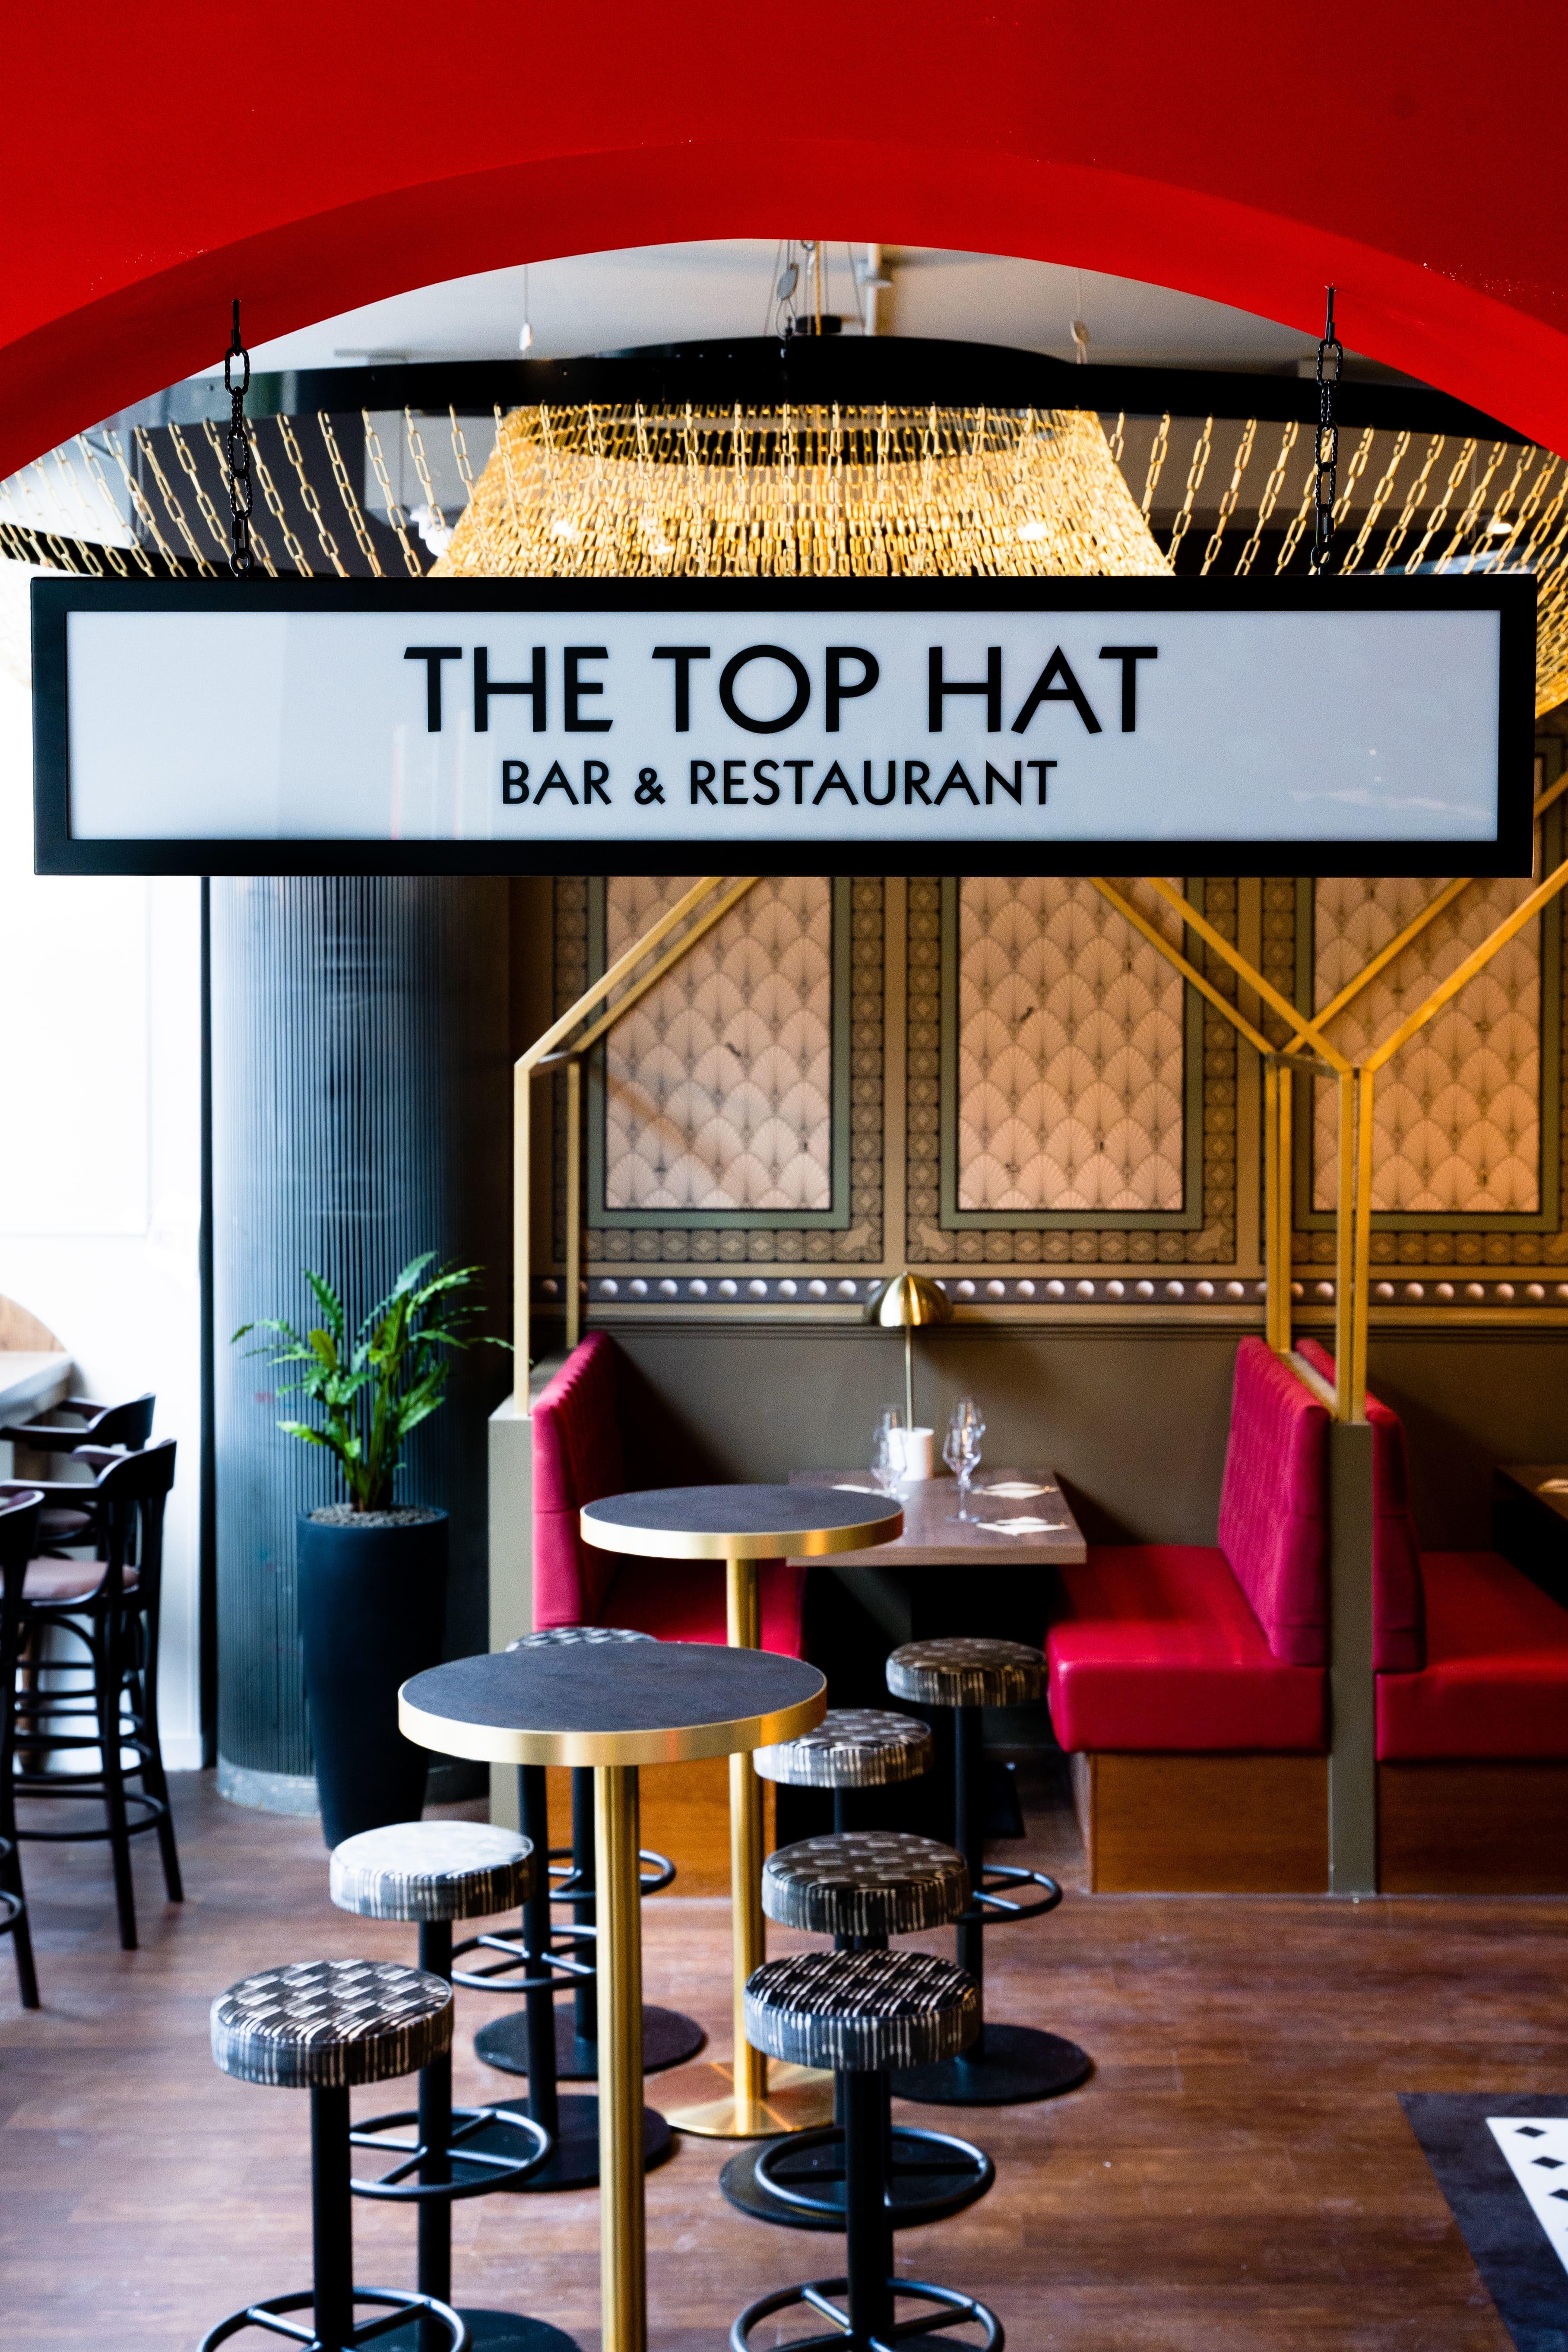 Top Hat Restaurant And Bar @ Monopoly Lifesized, Venue Hire And Experience photo #4